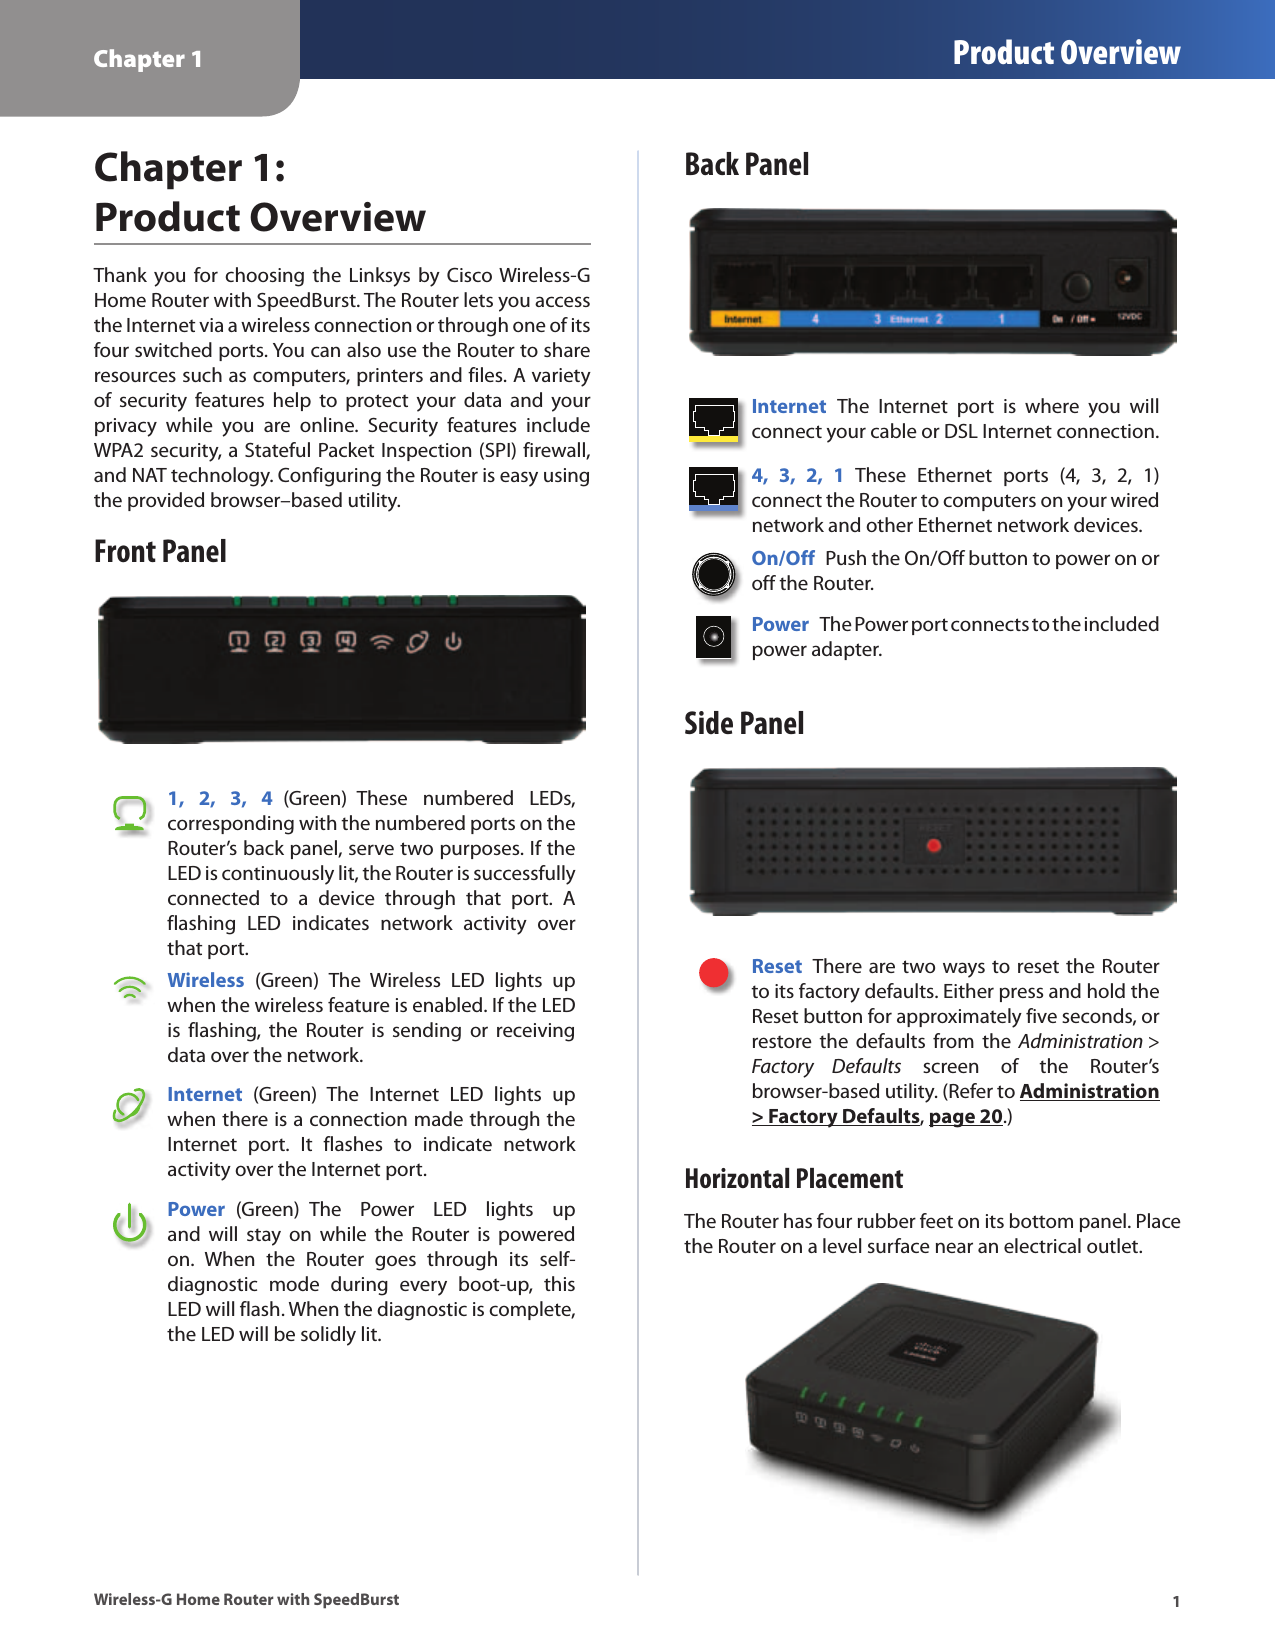 Chapter 1 Product Overview1Wireless-G Home Router with SpeedBurstChapter 1:  Product OverviewThank you  for  choosing the  Linksys by  Cisco Wireless-G Home Router with SpeedBurst. The Router lets you access the Internet via a wireless connection or through one of its four switched ports. You can also use the Router to share resources such as computers, printers and files. A variety of  security  features  help  to  protect  your  data  and  your privacy  while  you  are  online.  Security  features  include WPA2 security, a Stateful Packet Inspection (SPI) firewall, and NAT technology. Configuring the Router is easy using the provided browser–based utility.Front Panel1,  2,  3,  4  (Green)  These  numbered  LEDs, corresponding with the numbered ports on the Router’s back panel, serve two purposes. If the LED is continuously lit, the Router is successfully connected  to  a  device  through  that  port.  A flashing  LED  indicates  network  activity  over that port. Wireless  (Green)  The  Wireless  LED  lights  up when the wireless feature is enabled. If the LED is  flashing,  the  Router  is  sending  or  receiving data over the network.Internet  (Green)  The  Internet  LED  lights  up when there is a connection made through the Internet  port.  It  flashes  to  indicate  network activity over the Internet port. Power  (Green)  The  Power  LED  lights  up and  will  stay  on  while  the  Router  is  powered on.  When  the  Router  goes  through  its  self-diagnostic  mode  during  every  boot-up,  this LED will flash. When the diagnostic is complete, the LED will be solidly lit.Back PanelInternet  The  Internet  port  is  where  you  will connect your cable or DSL Internet connection. 4,  3,  2,  1  These  Ethernet  ports  (4,  3,  2,  1) connect the Router to computers on your wired network and other Ethernet network devices. On/Off  Push the On/Off button to power on or off the Router.Power  The Power port connects to the included power adapter.Side PanelReset  There are two ways to reset the Router to its factory defaults. Either press and hold the Reset button for approximately five seconds, or restore  the  defaults  from  the  Administration &gt; Factory  Defaults  screen  of  the  Router’s browser-based utility. (Refer to Administration &gt; Factory Defaults, page 20.)Horizontal PlacementThe Router has four rubber feet on its bottom panel. Place the Router on a level surface near an electrical outlet.